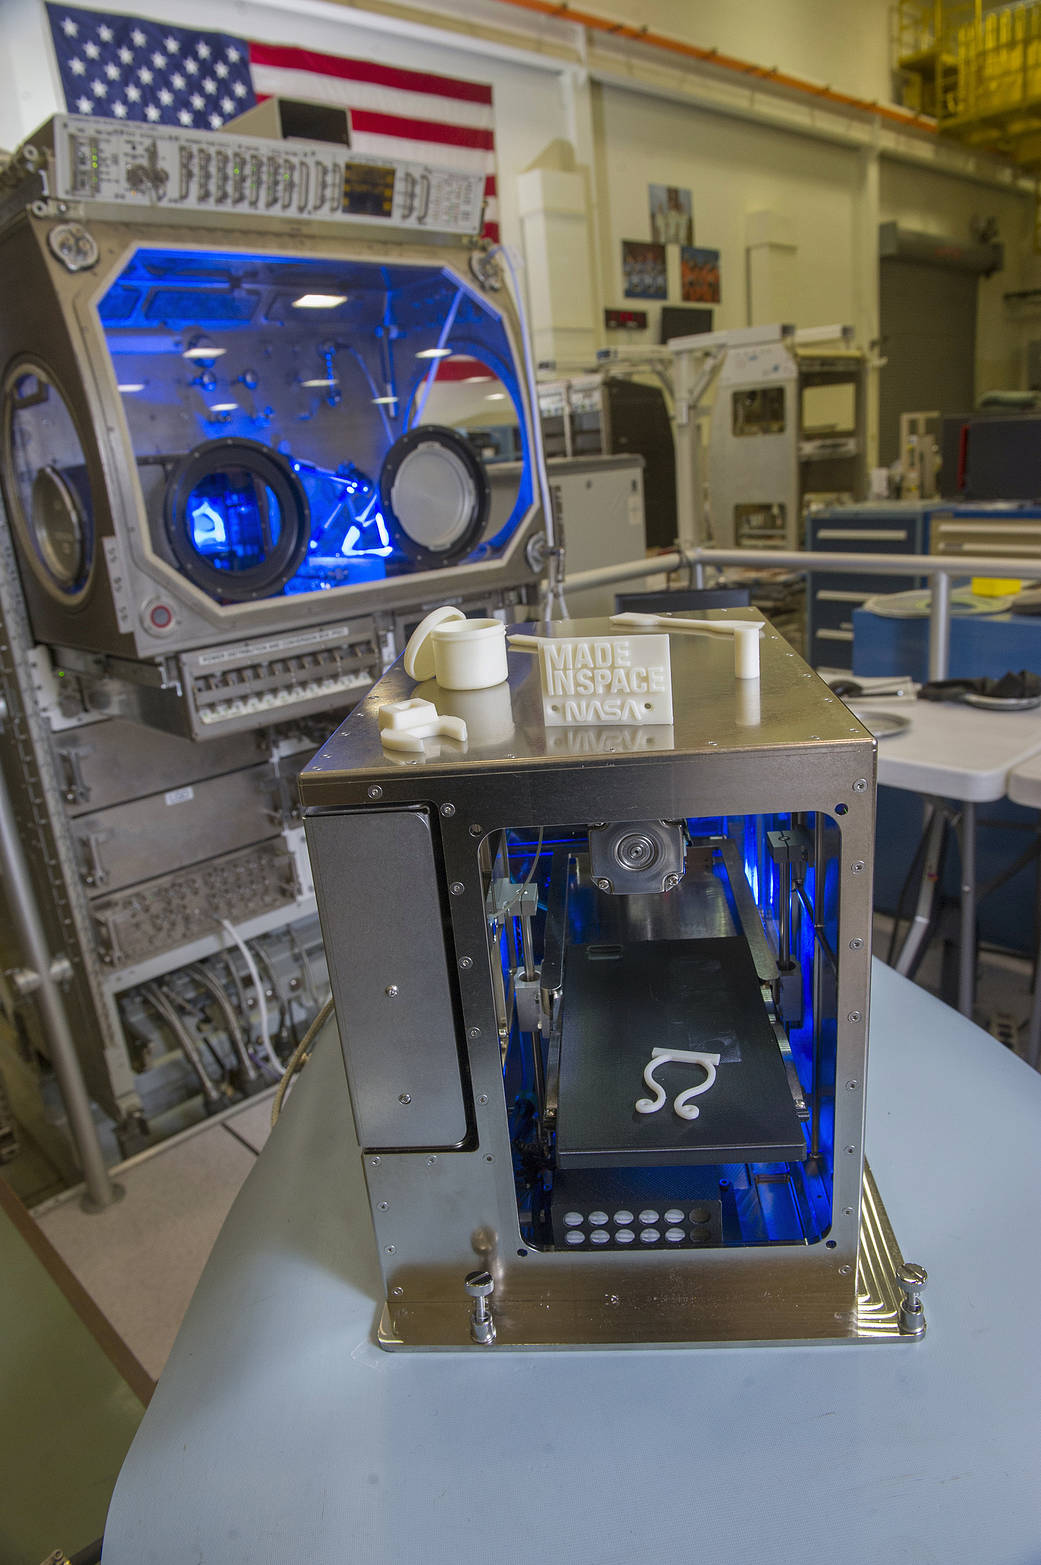 The Space Station’s 3-D printer during flight certification and acceptance testing at NASA's Marshall Space Flight Center.